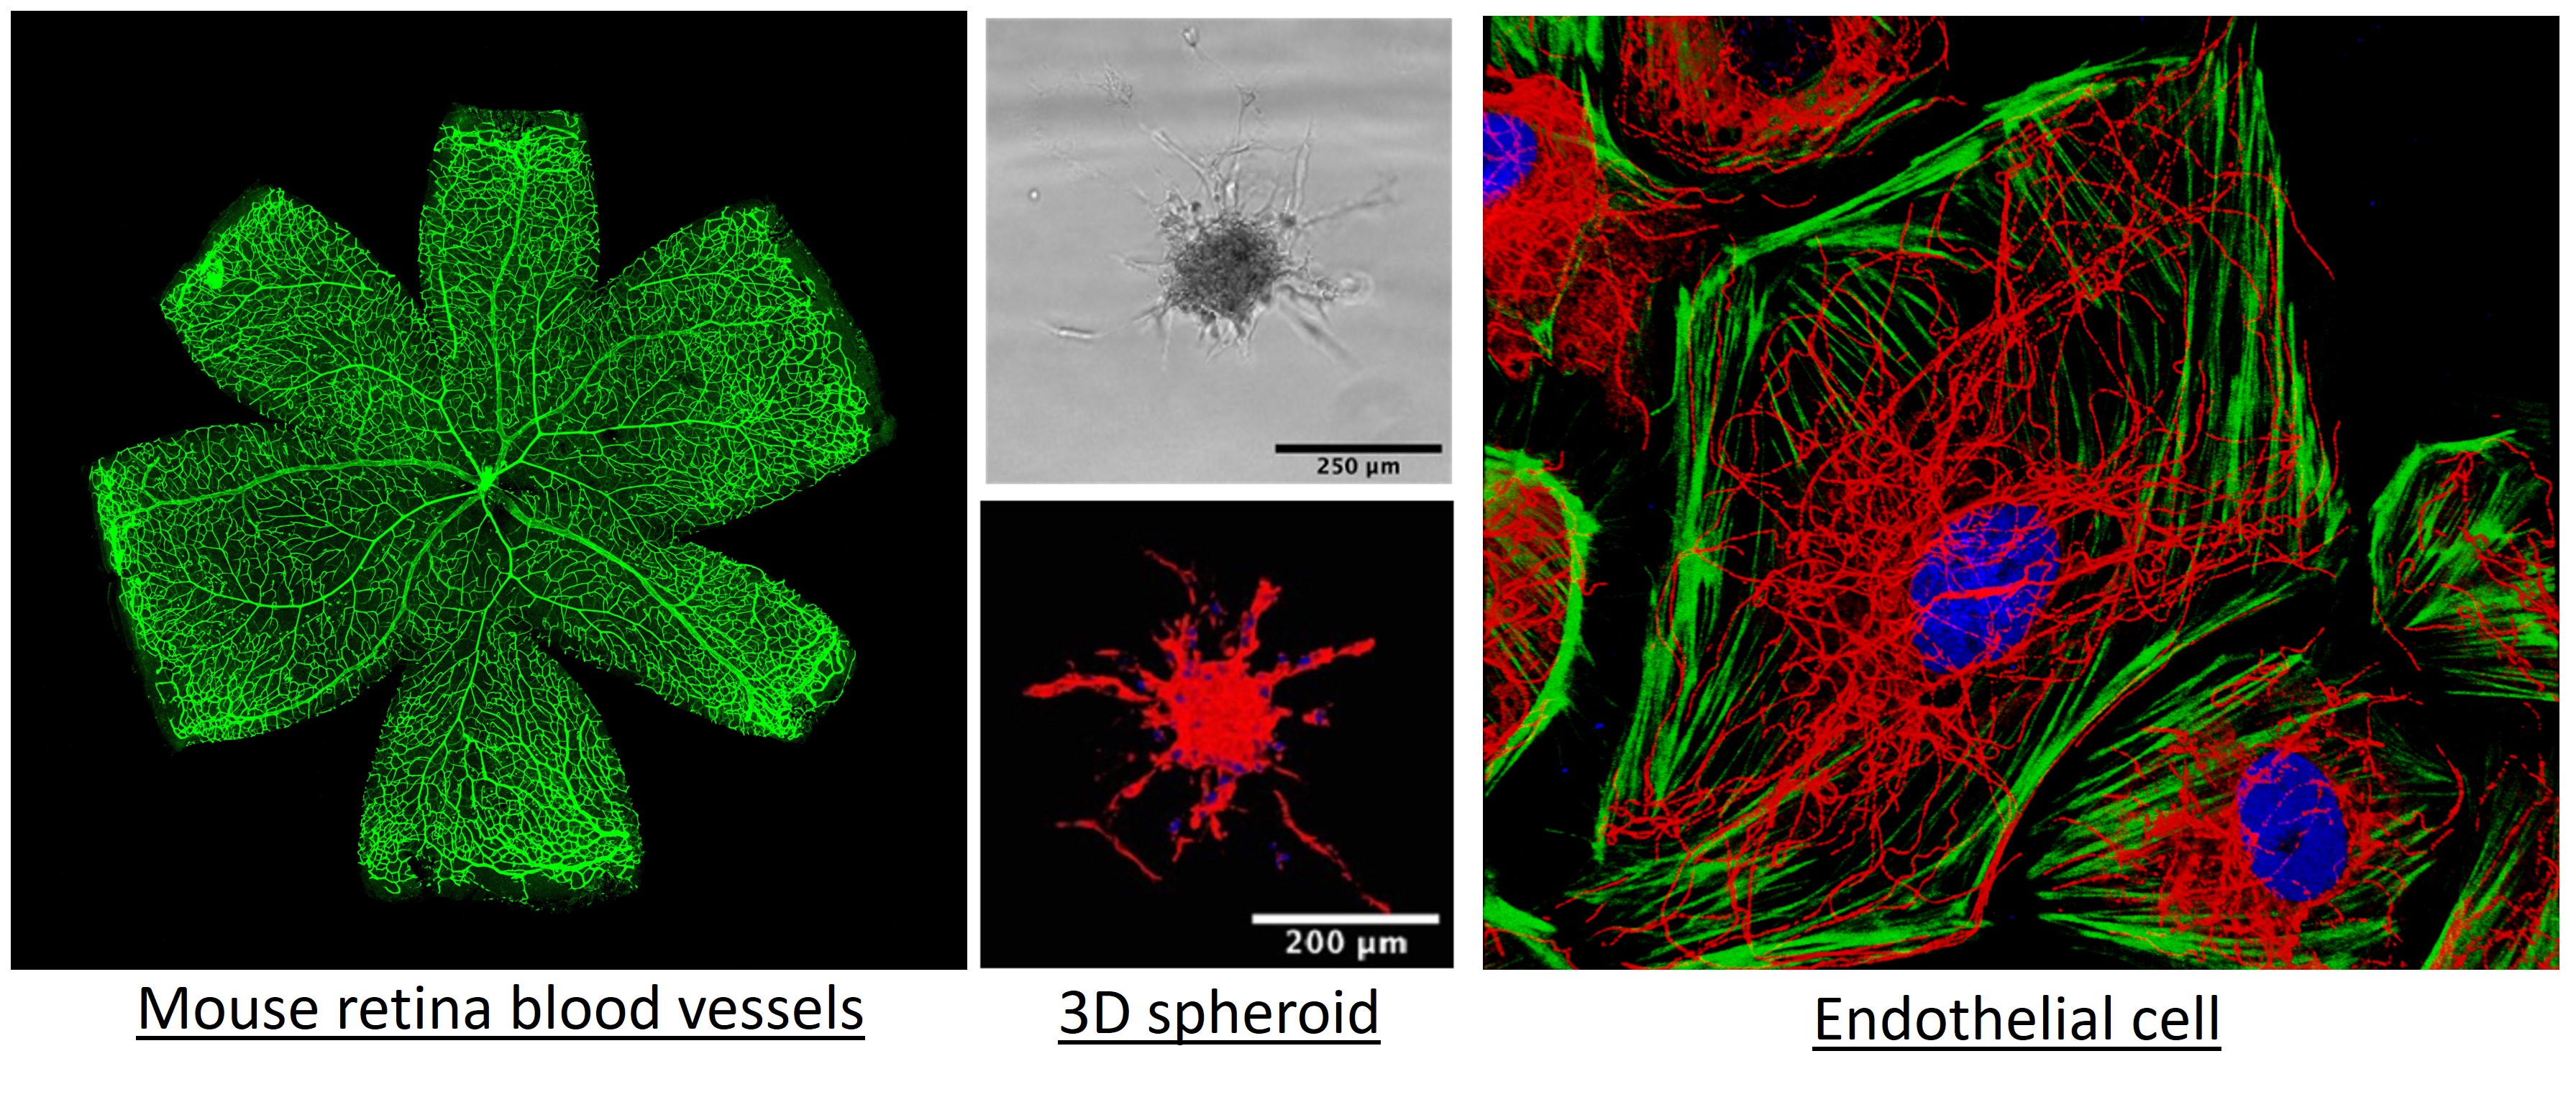 Microscopy images examples of Birdsey's group. Mouse retina blood vessels on the left, a 3D spheroid on the centre, and endothelial cells on the right 